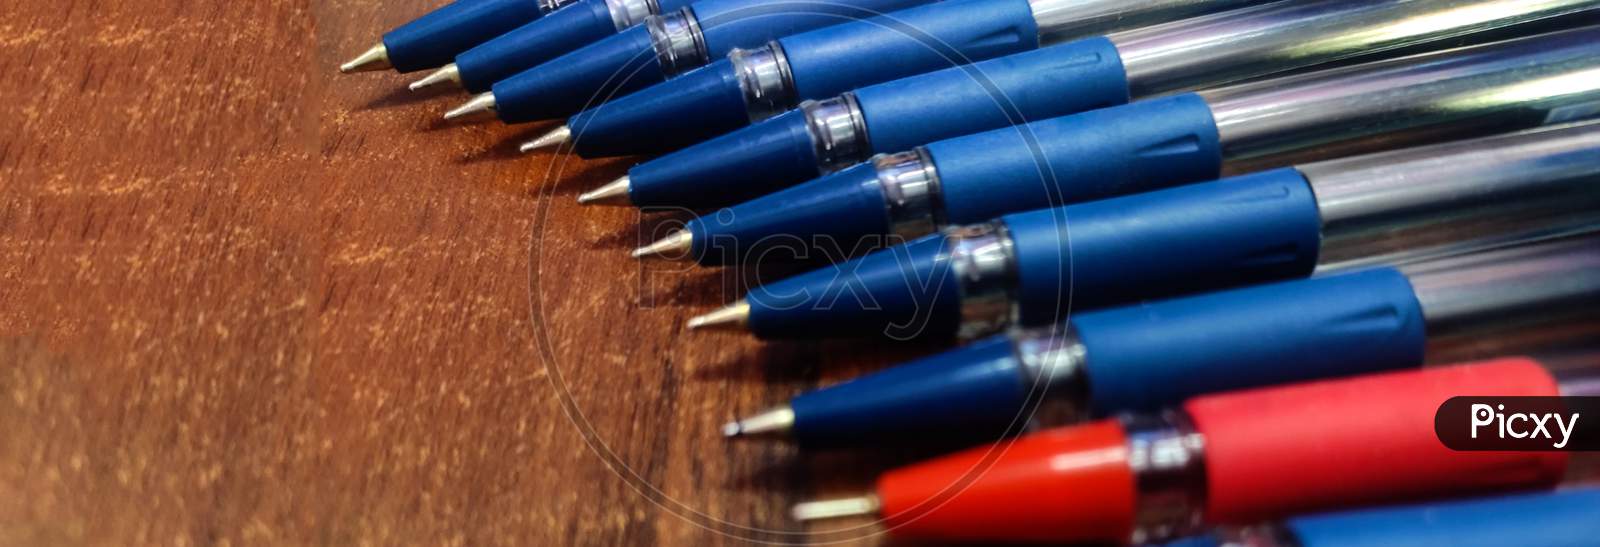 Stockpiled blue and red ball pin point pens lying on a wooden table vertical image with wooden background